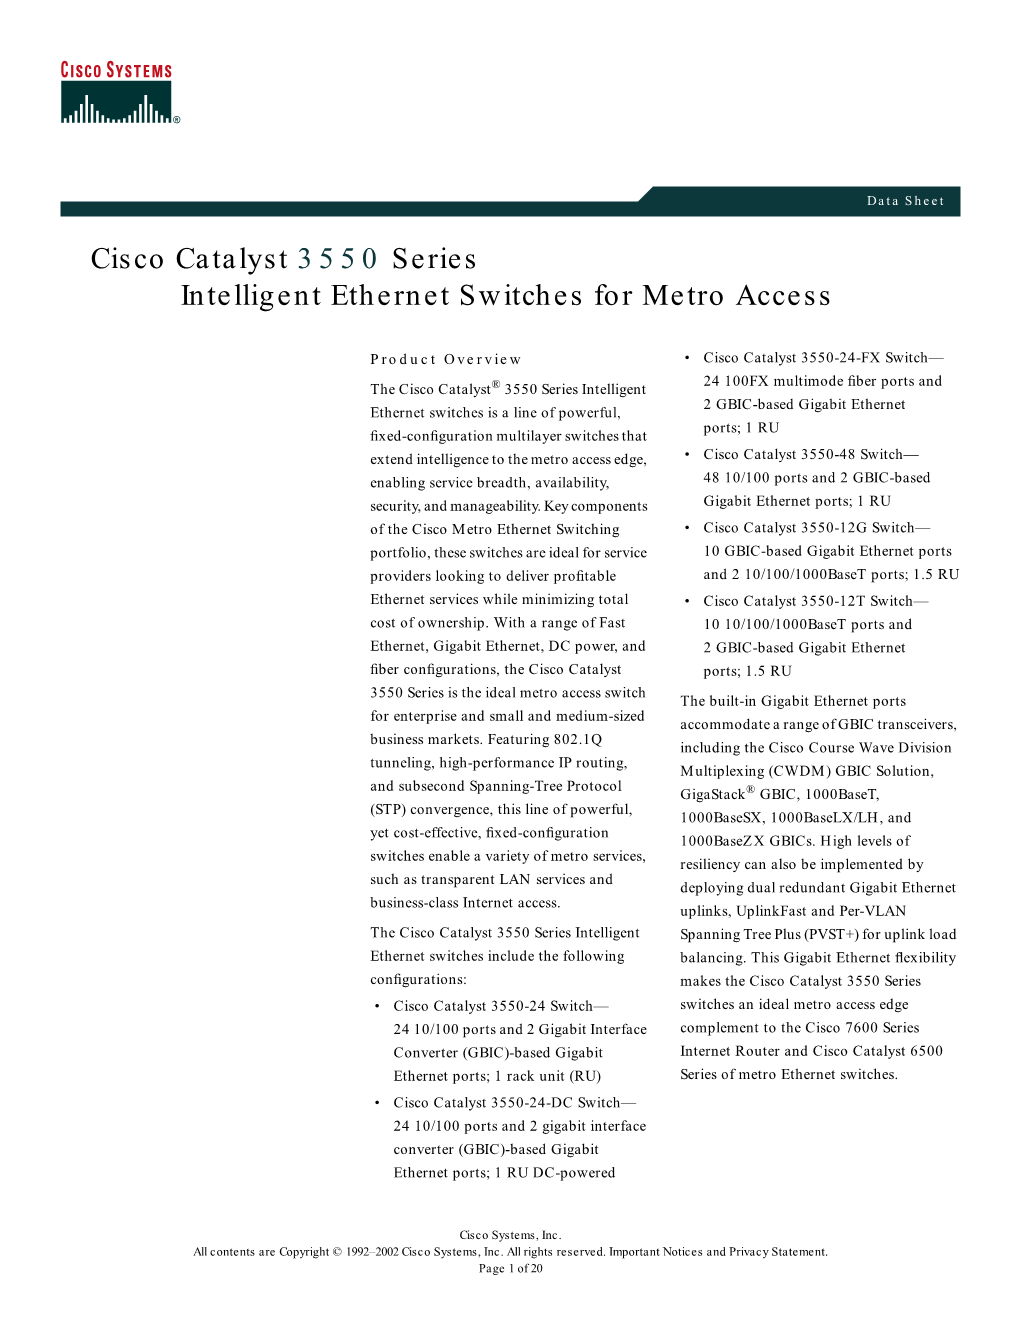 Cisco Catalyst 3550 Series Intelligent Ethernet Switches for Metro Access